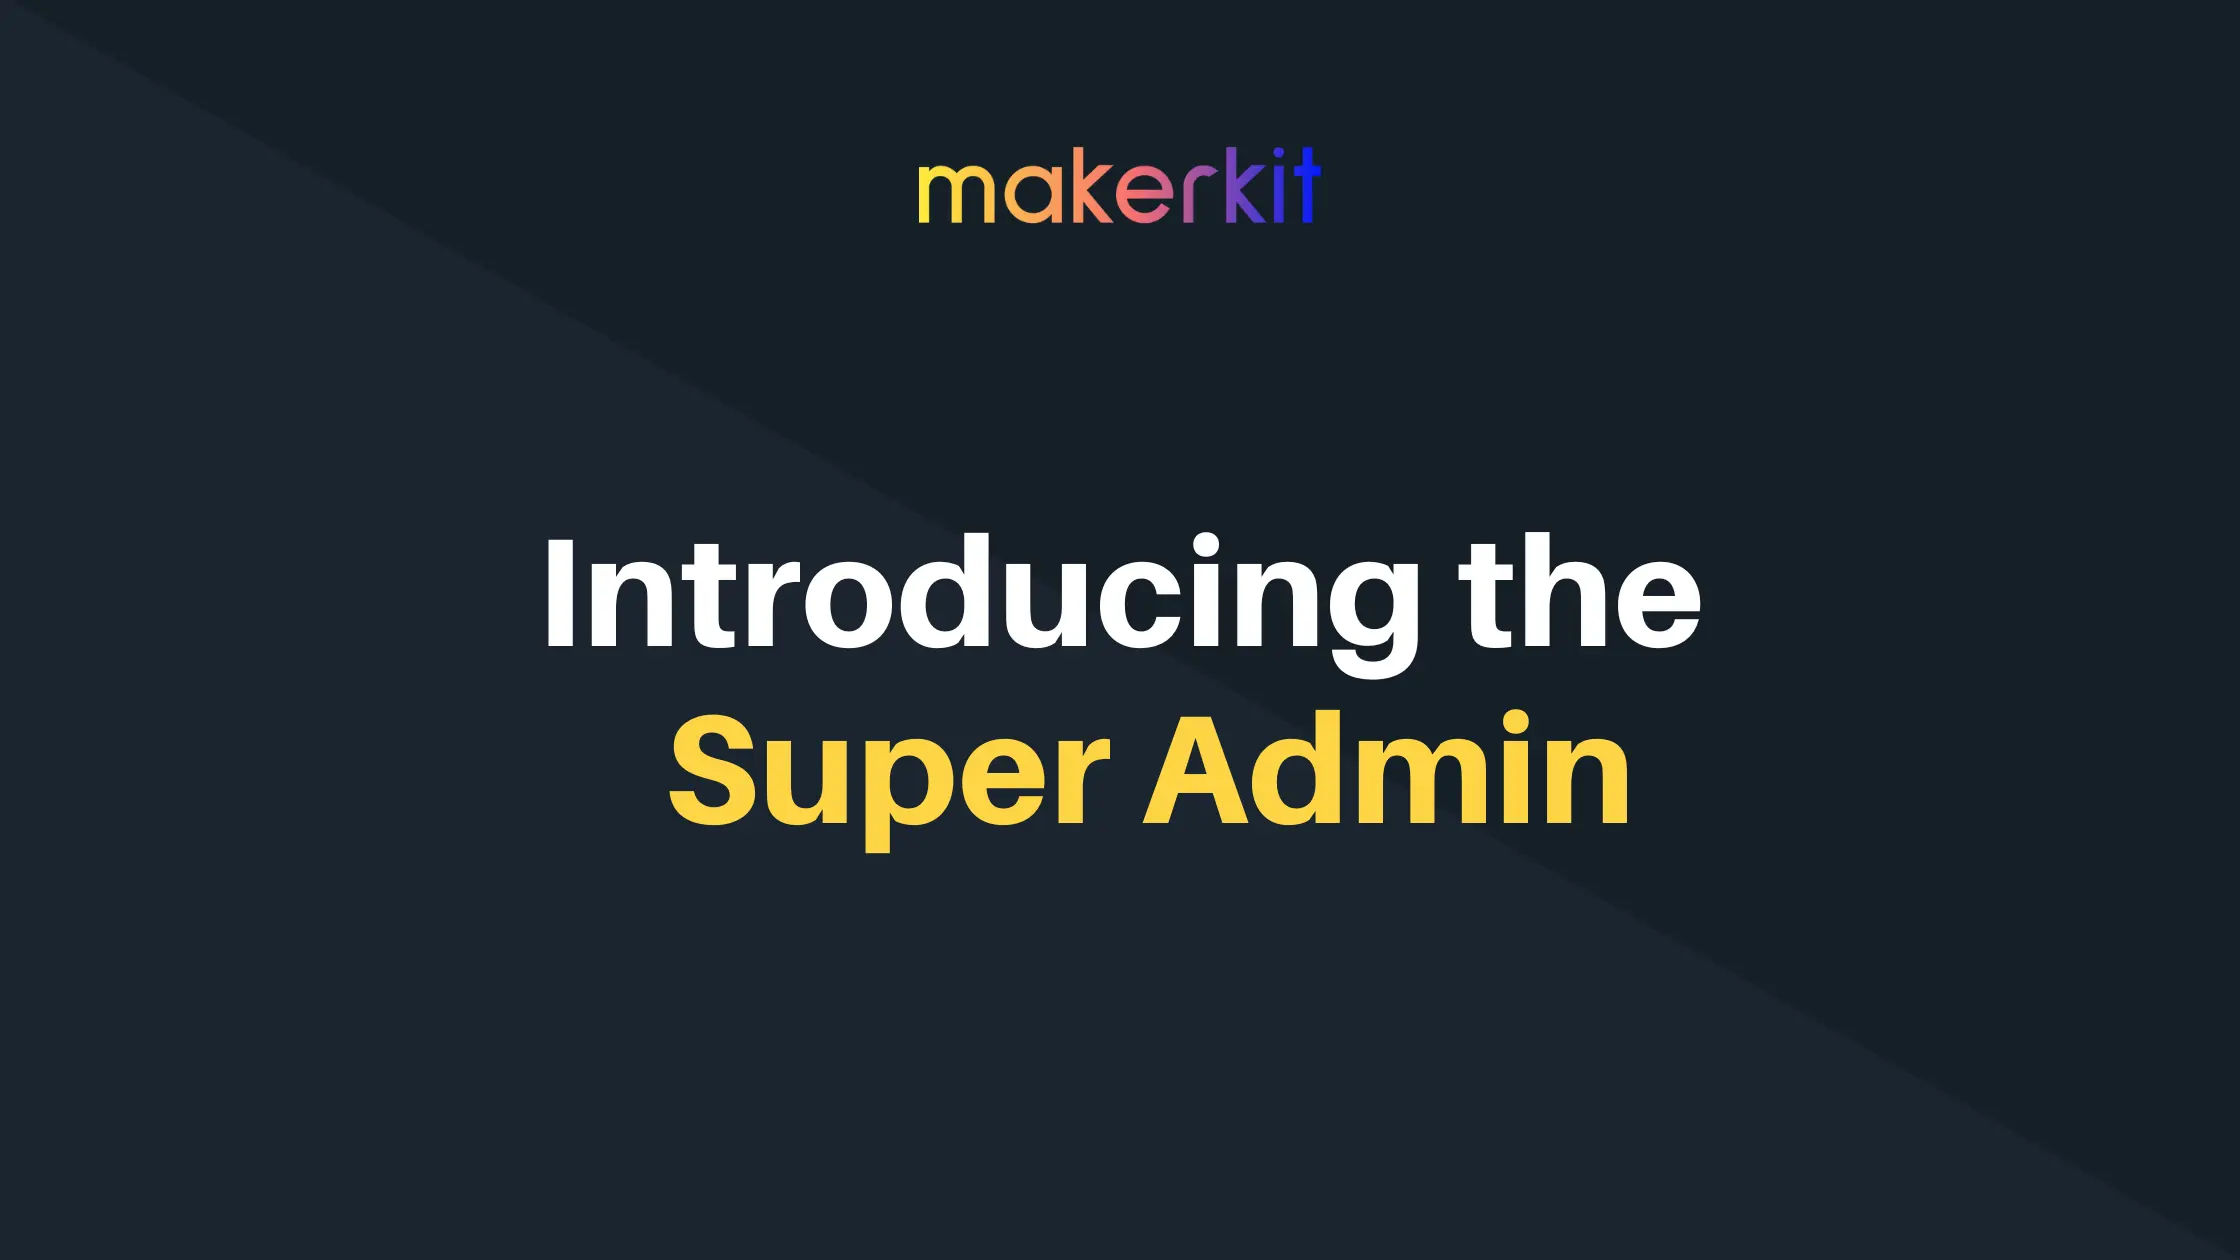 Cover Image for Introducing the Makerkit Super Admin